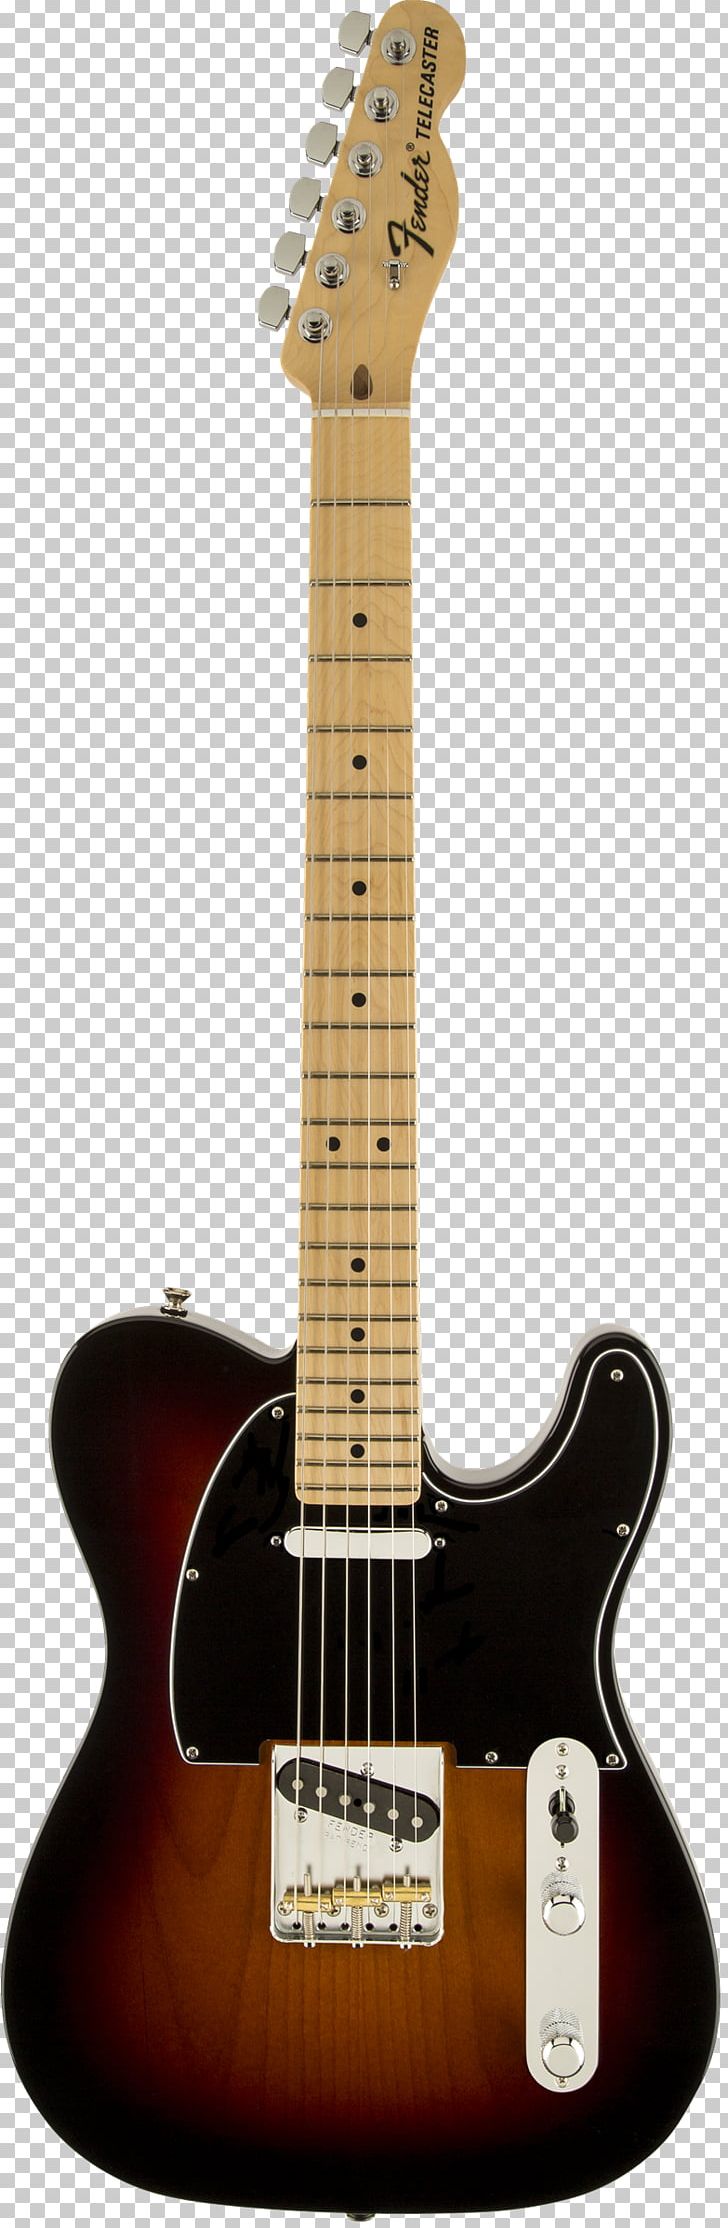 Fender Telecaster Deluxe Fender Stratocaster Fender Telecaster Custom Fender Telecaster Thinline PNG, Clipart, American, Guitar Accessory, Jazz Guitarist, Musical Instrument, Musical Instruments Free PNG Download